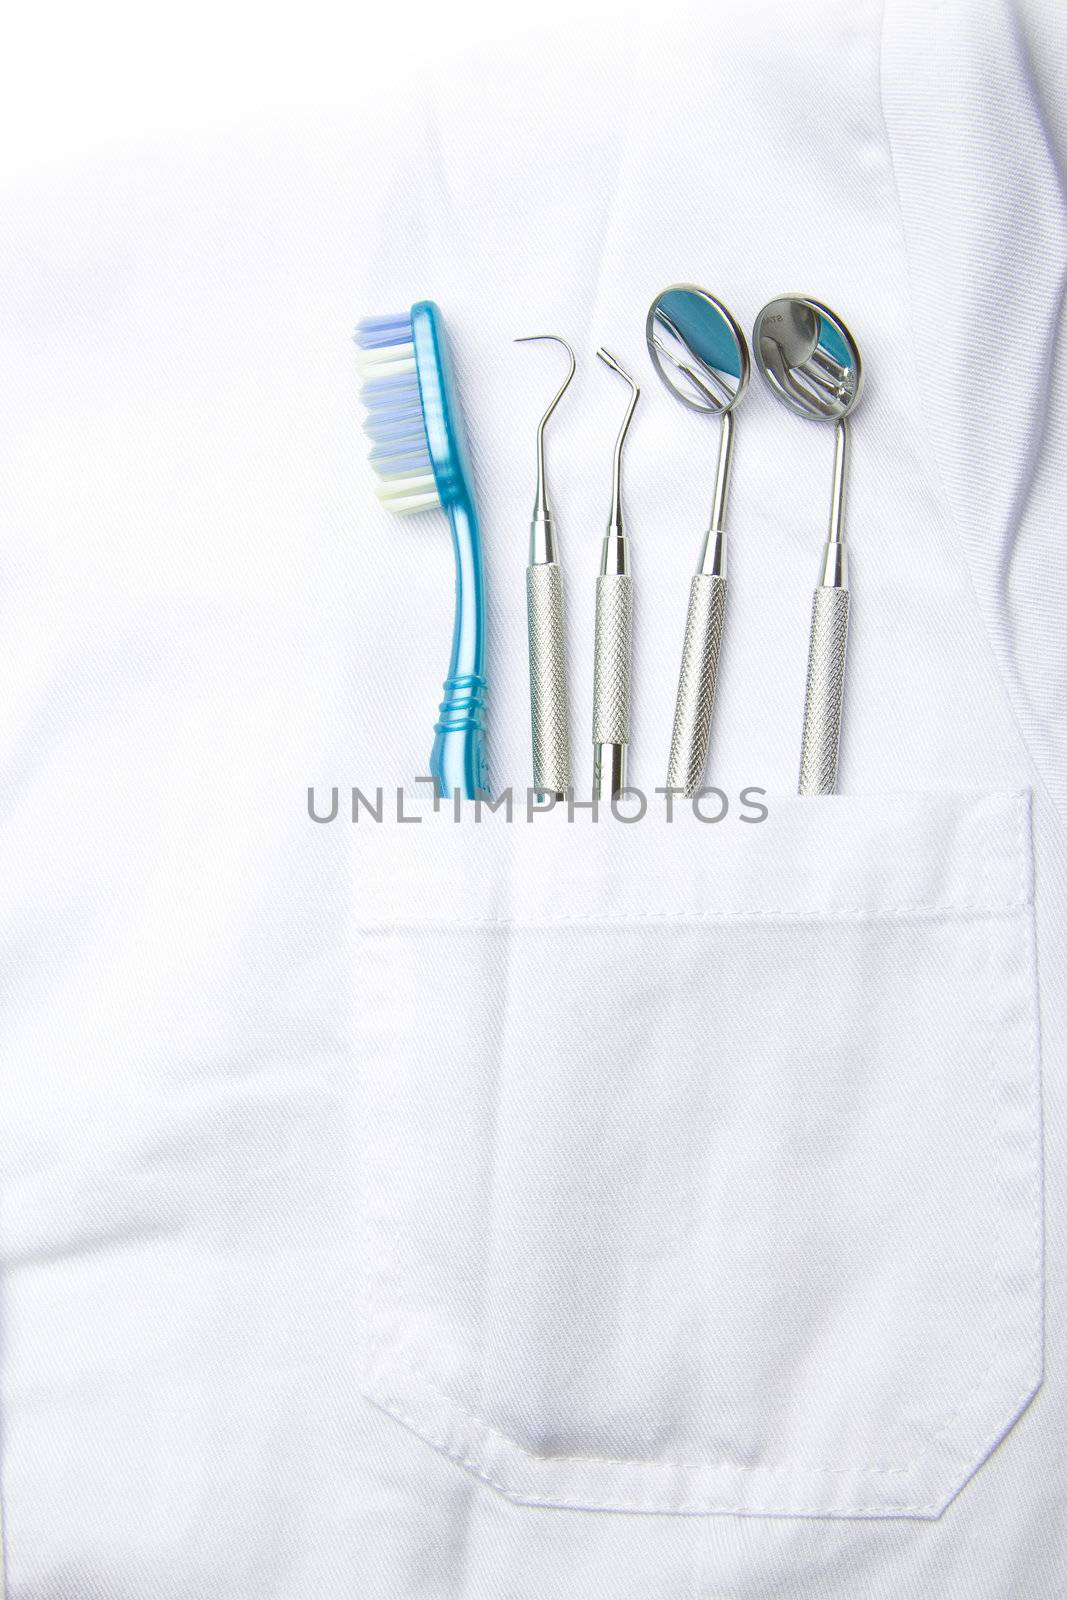 Dentist Pocket With Care Instruments by adamr